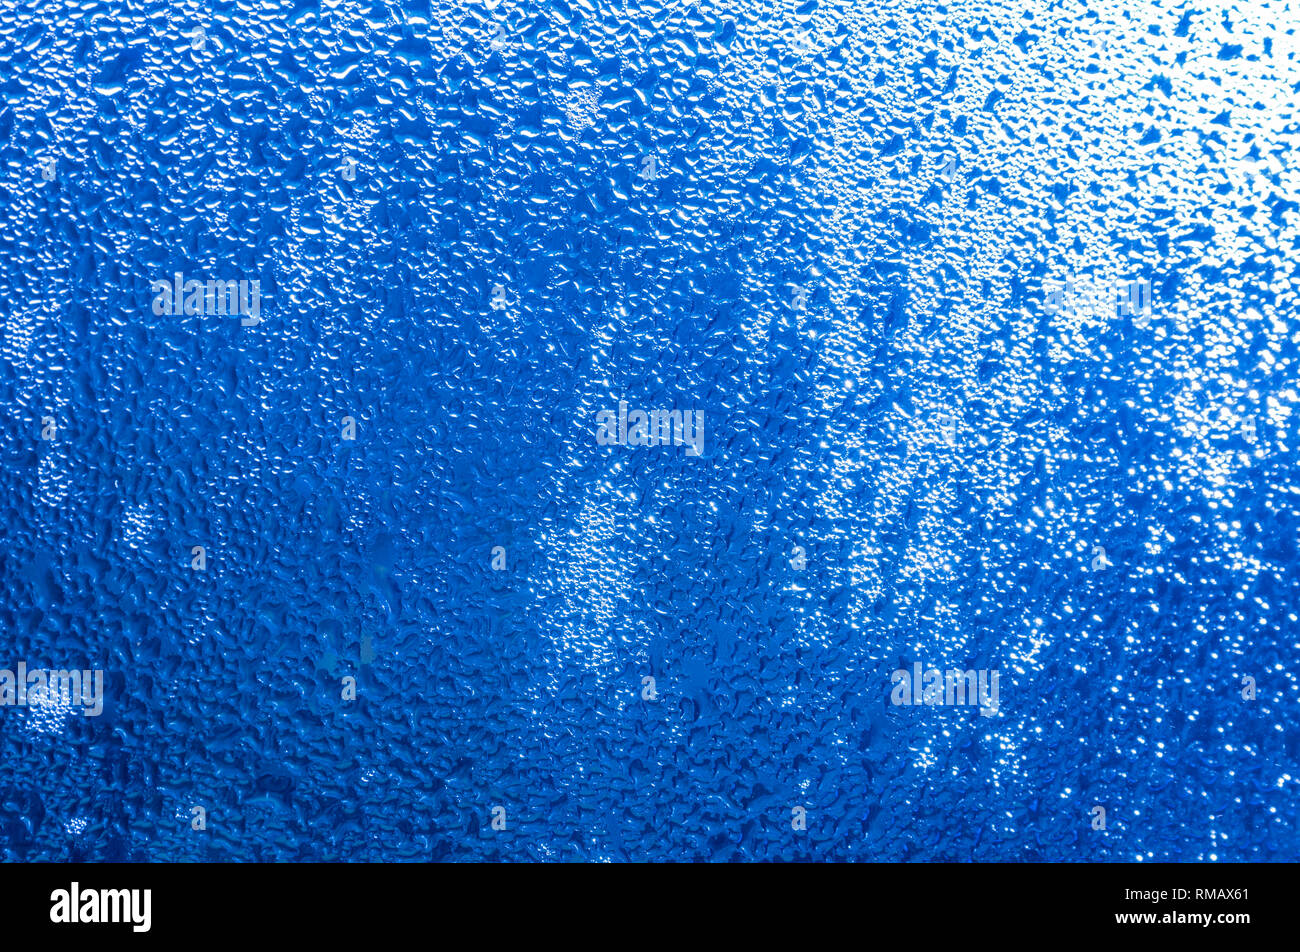 Blue abstract image of condensation on a window in the morning. Stock Photo